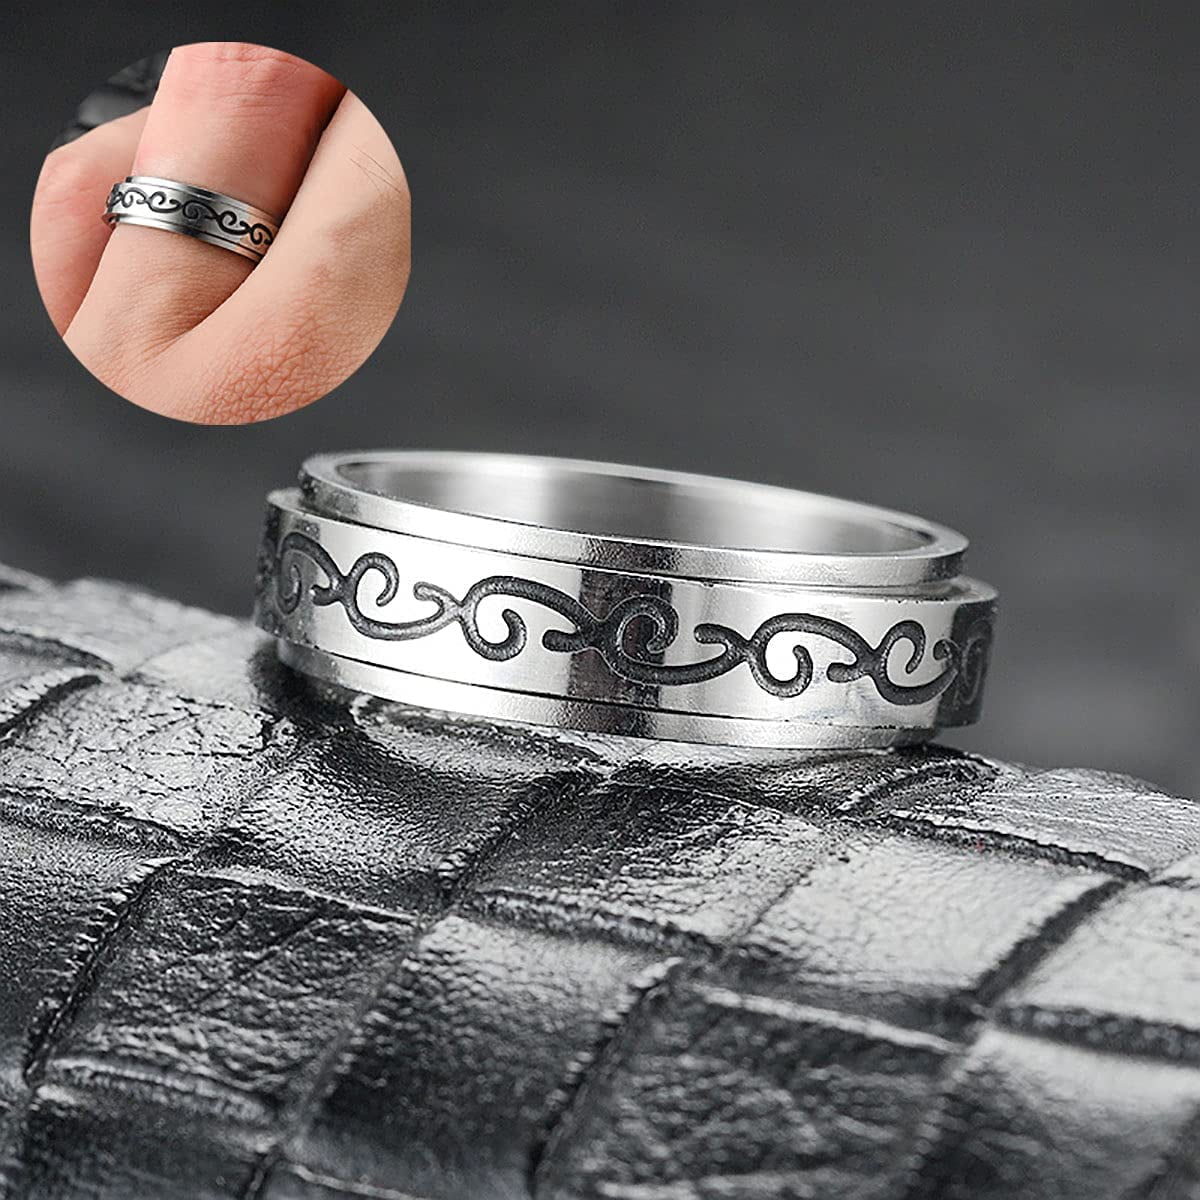 4PCS Plain Band Rings for Men Stainless Steel Rings Set Lord of the Rings  Ring